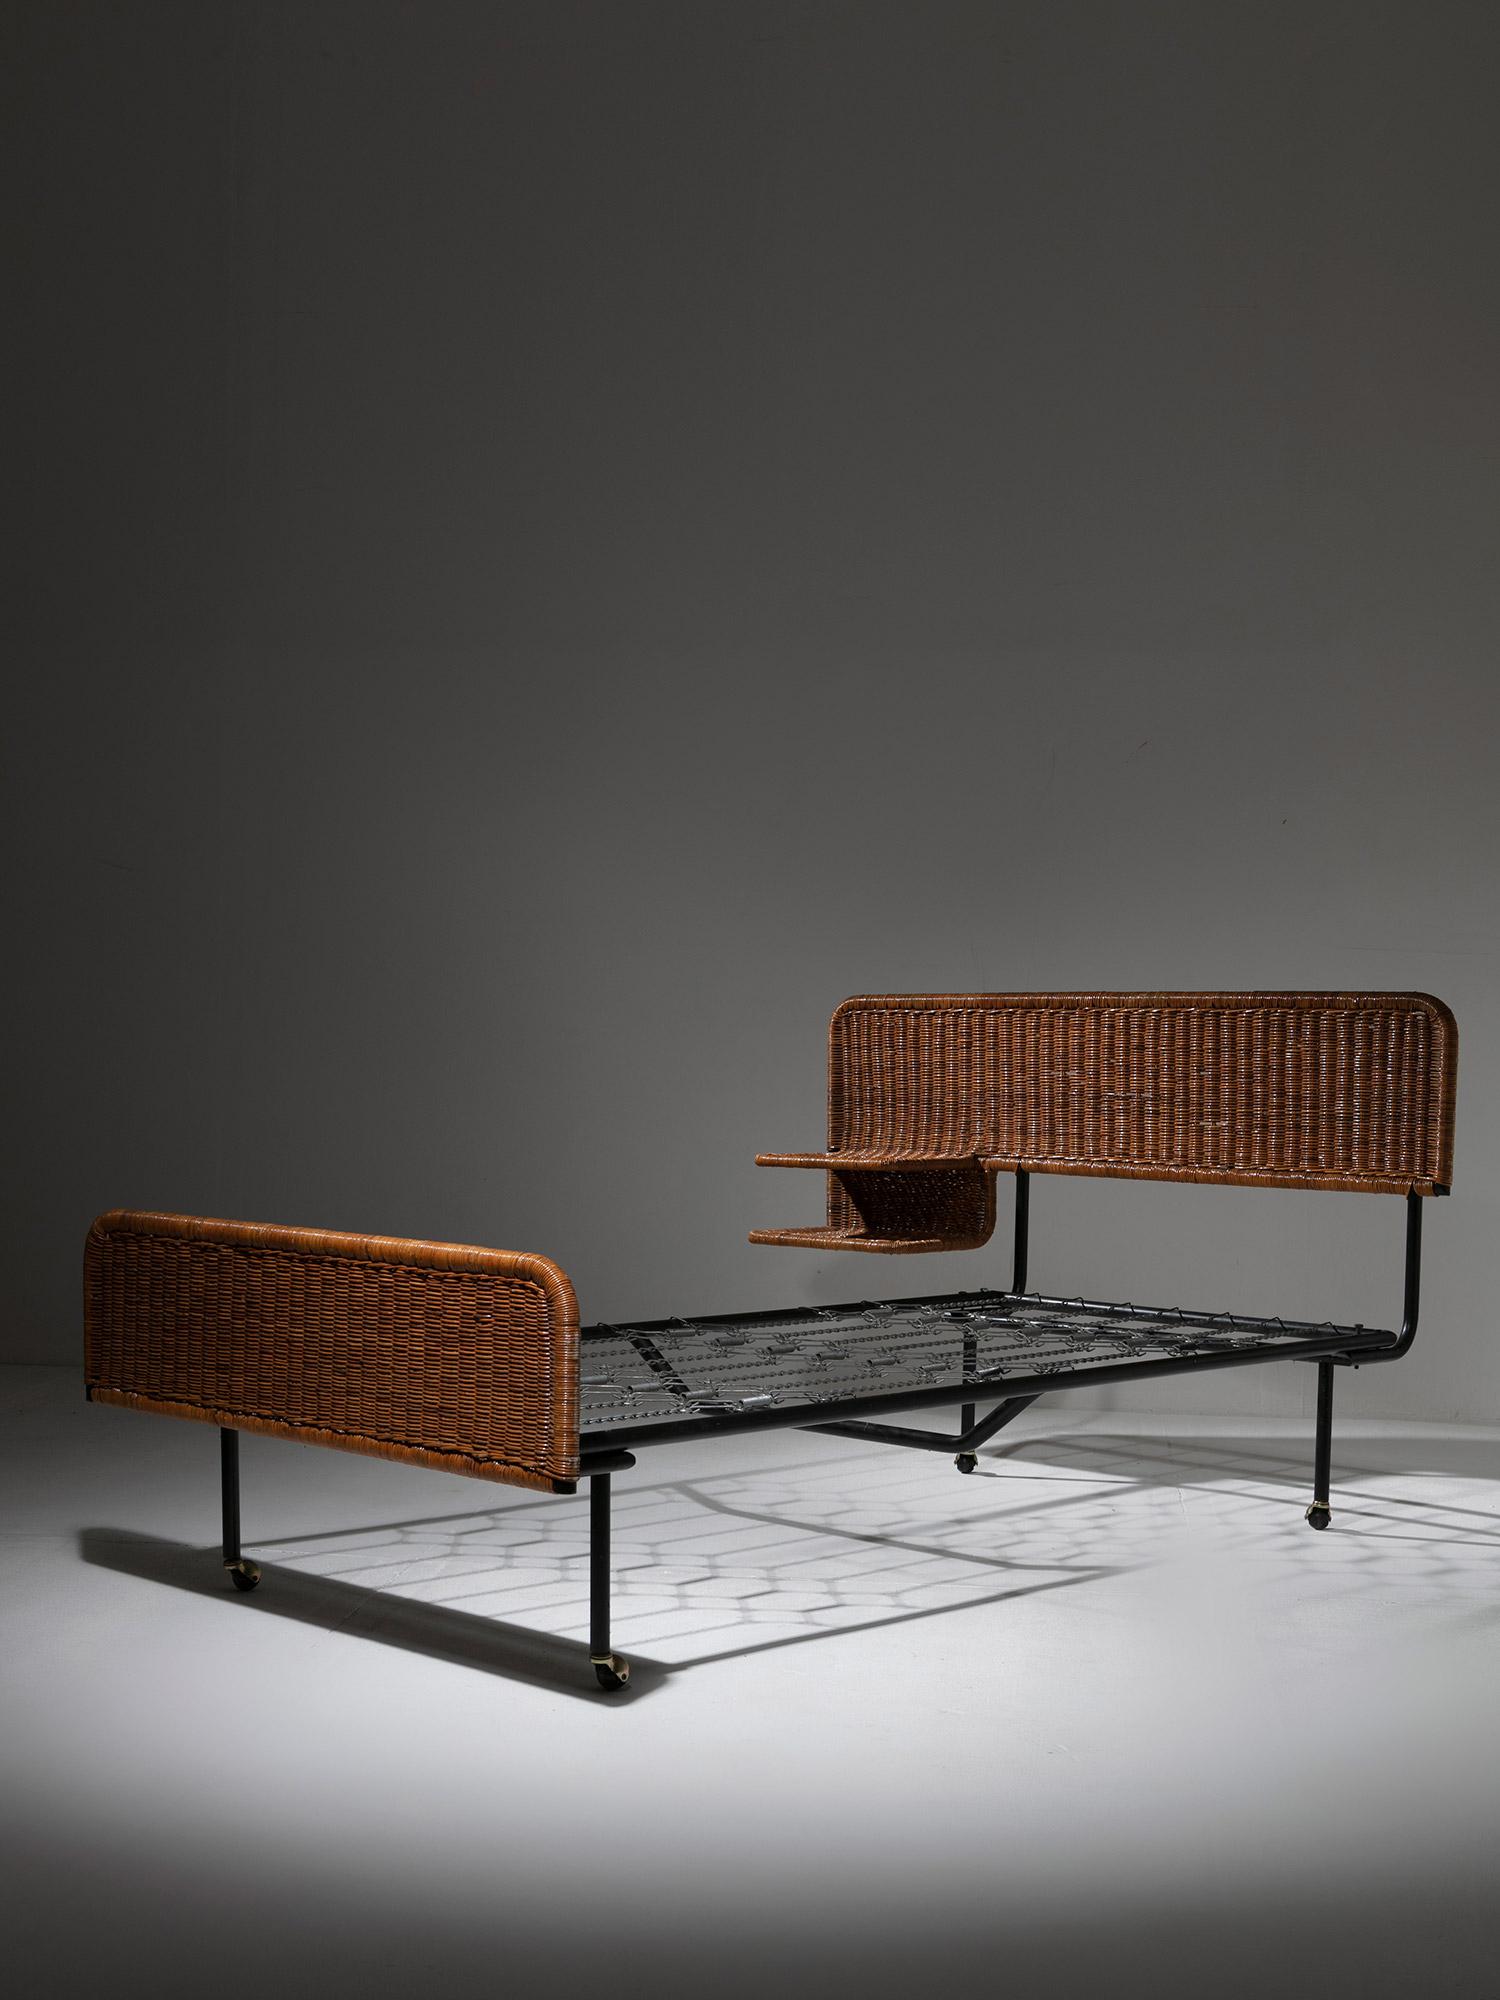 Italian Minimal Metal and Wicker Single Bed with Integrated Shelves, Italy, 1960s For Sale